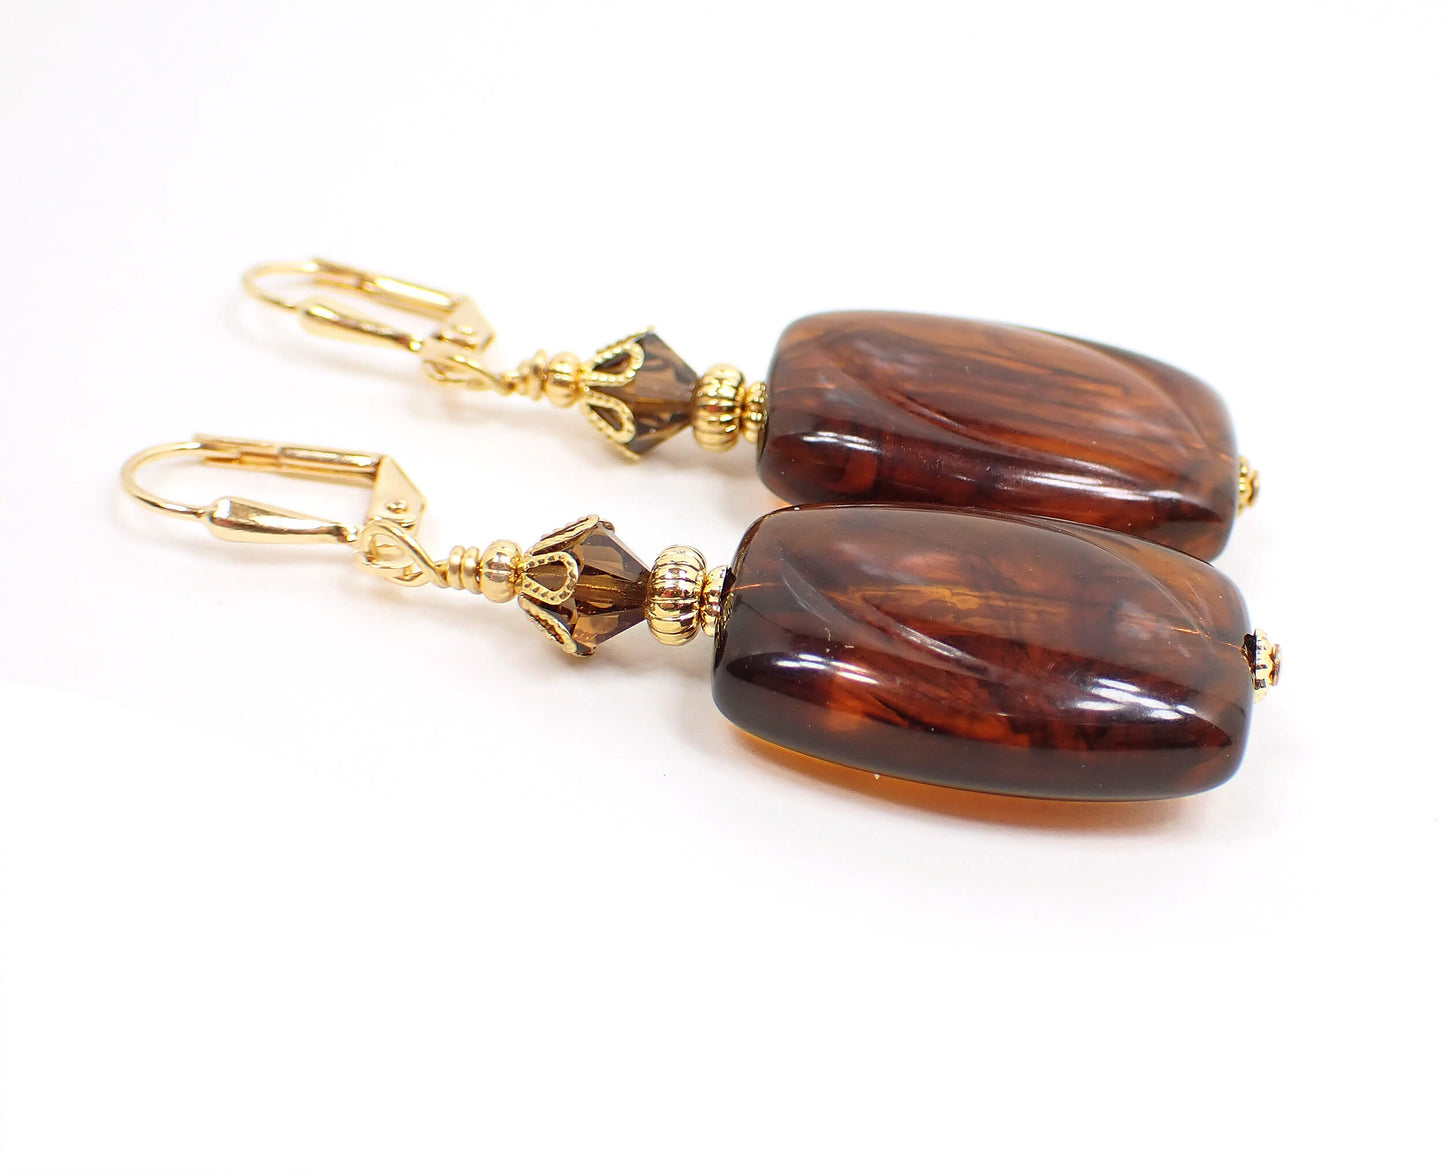 Handmade Marbled Brown Acrylic Drop Earrings Gold Plated Hook Lever Back or Clip On